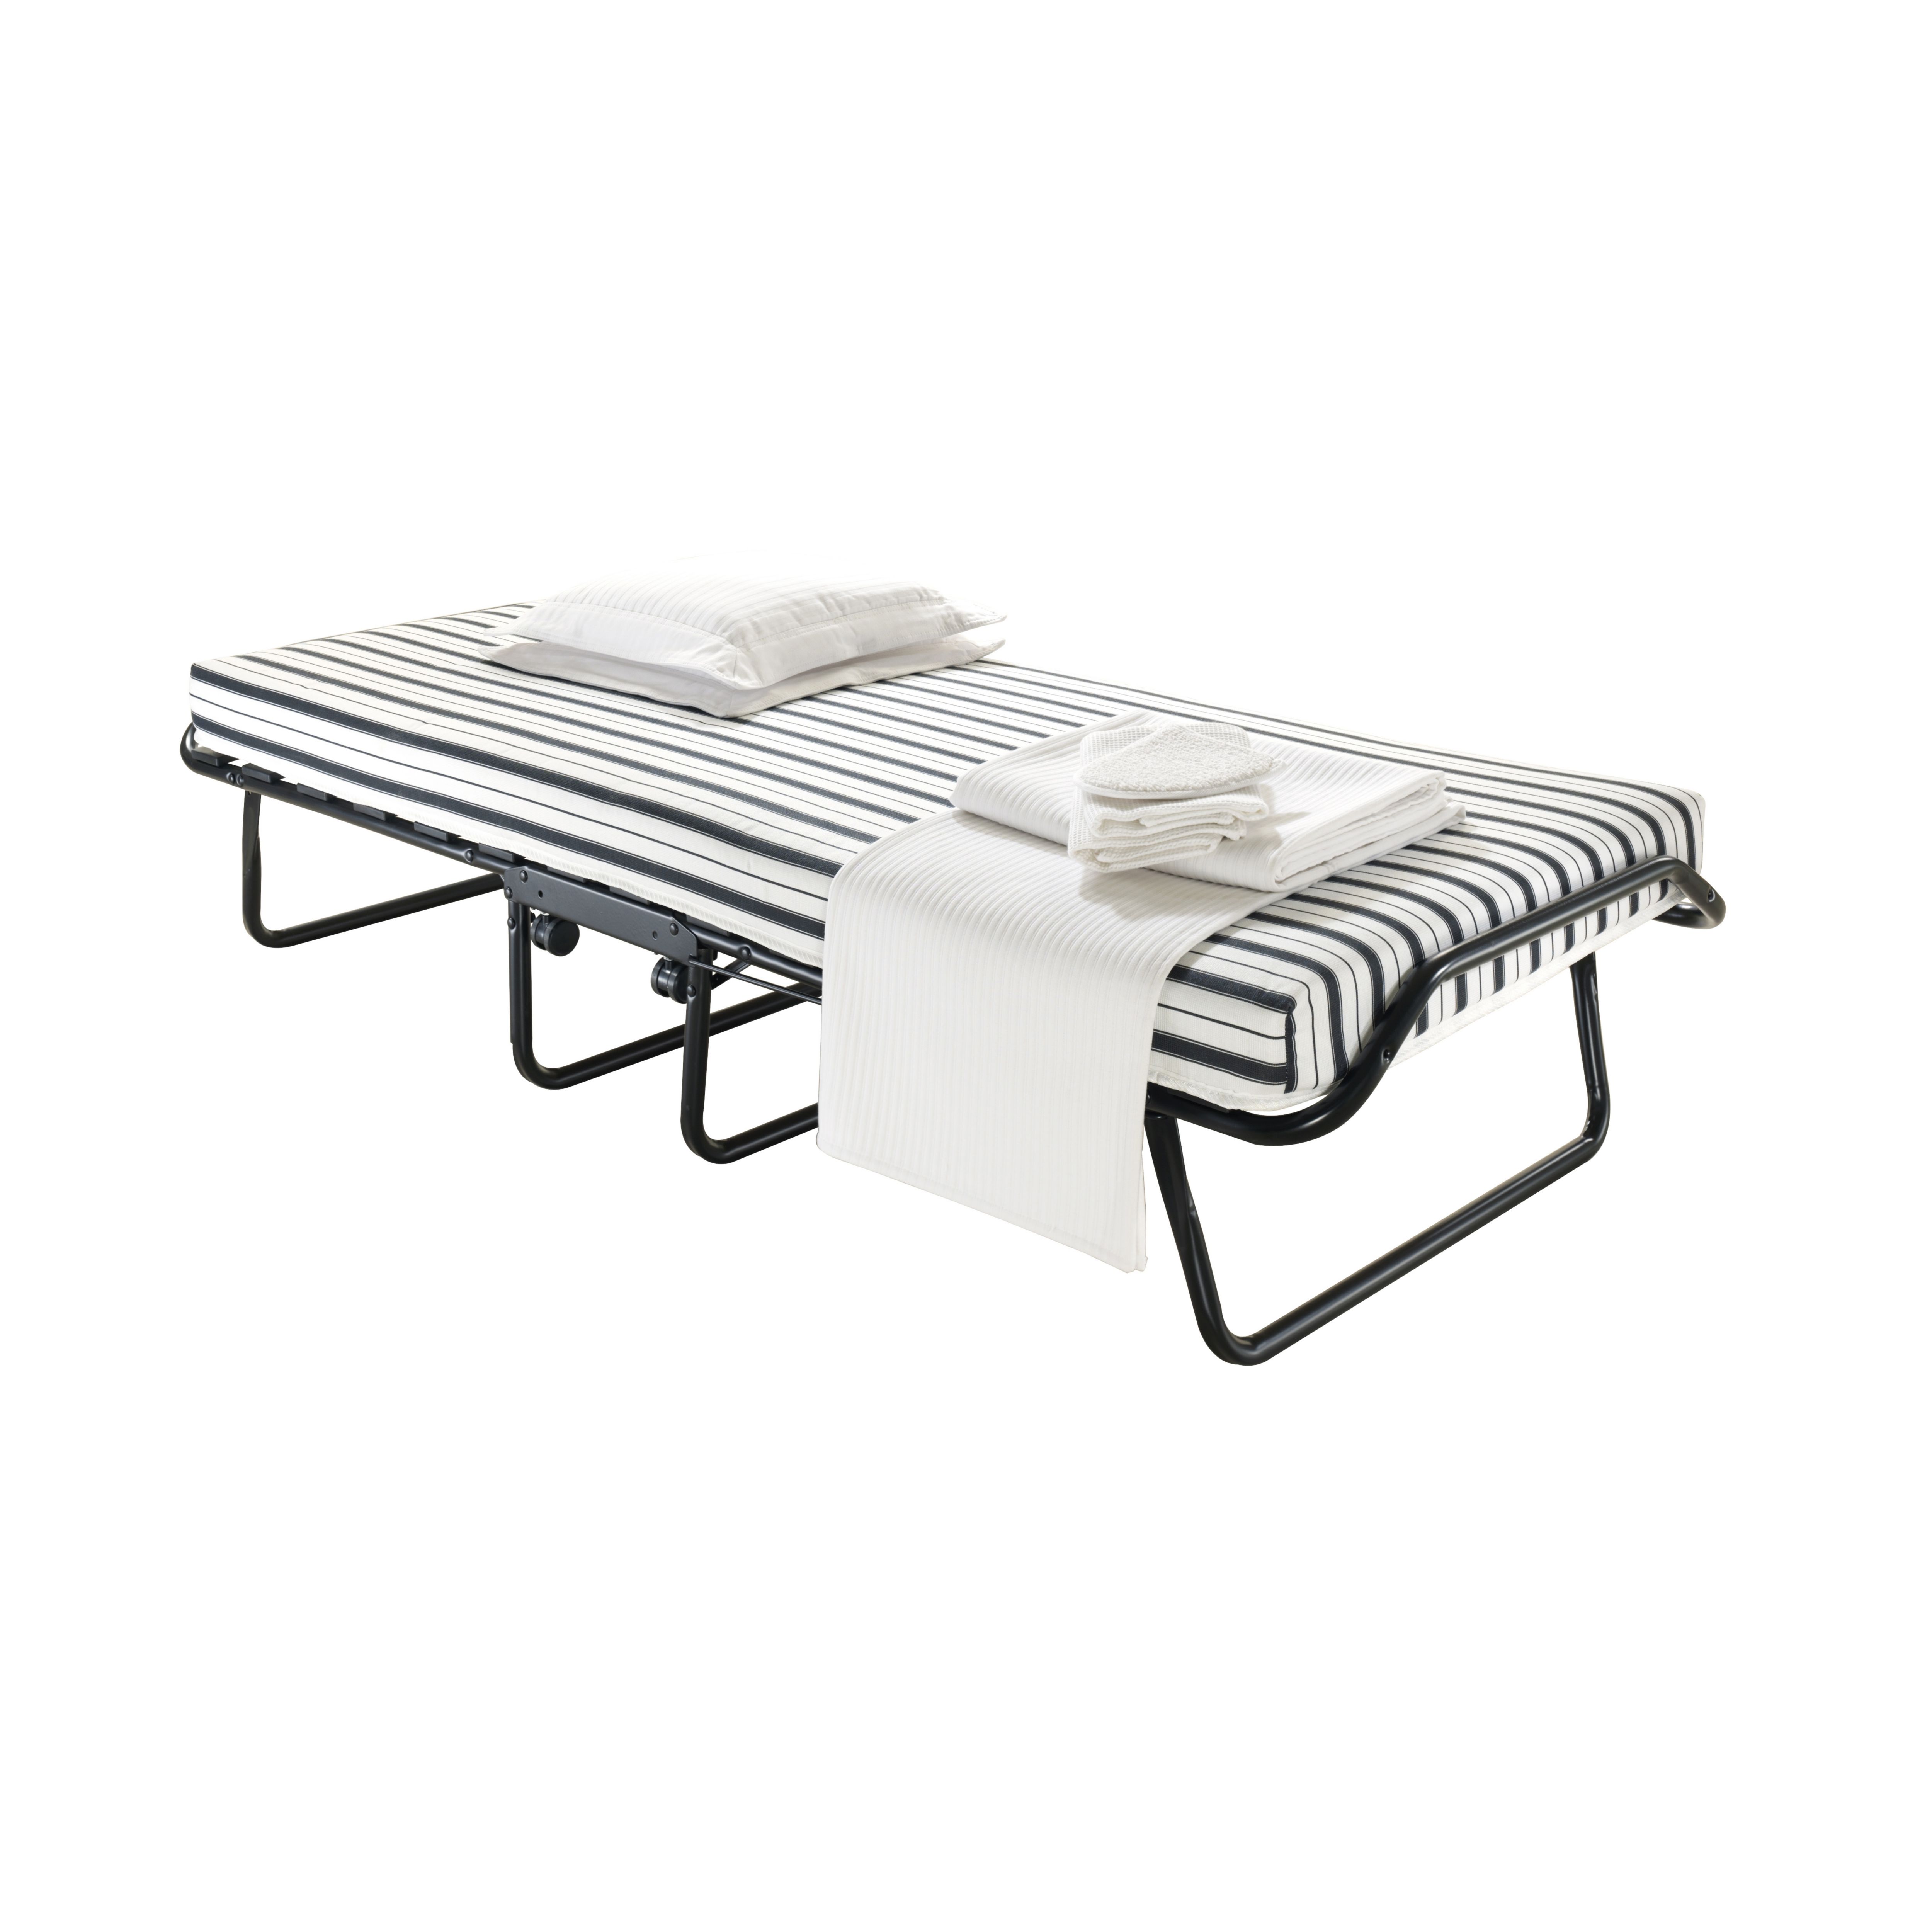 Jay-Be Burley Single Foldable Guest Bed